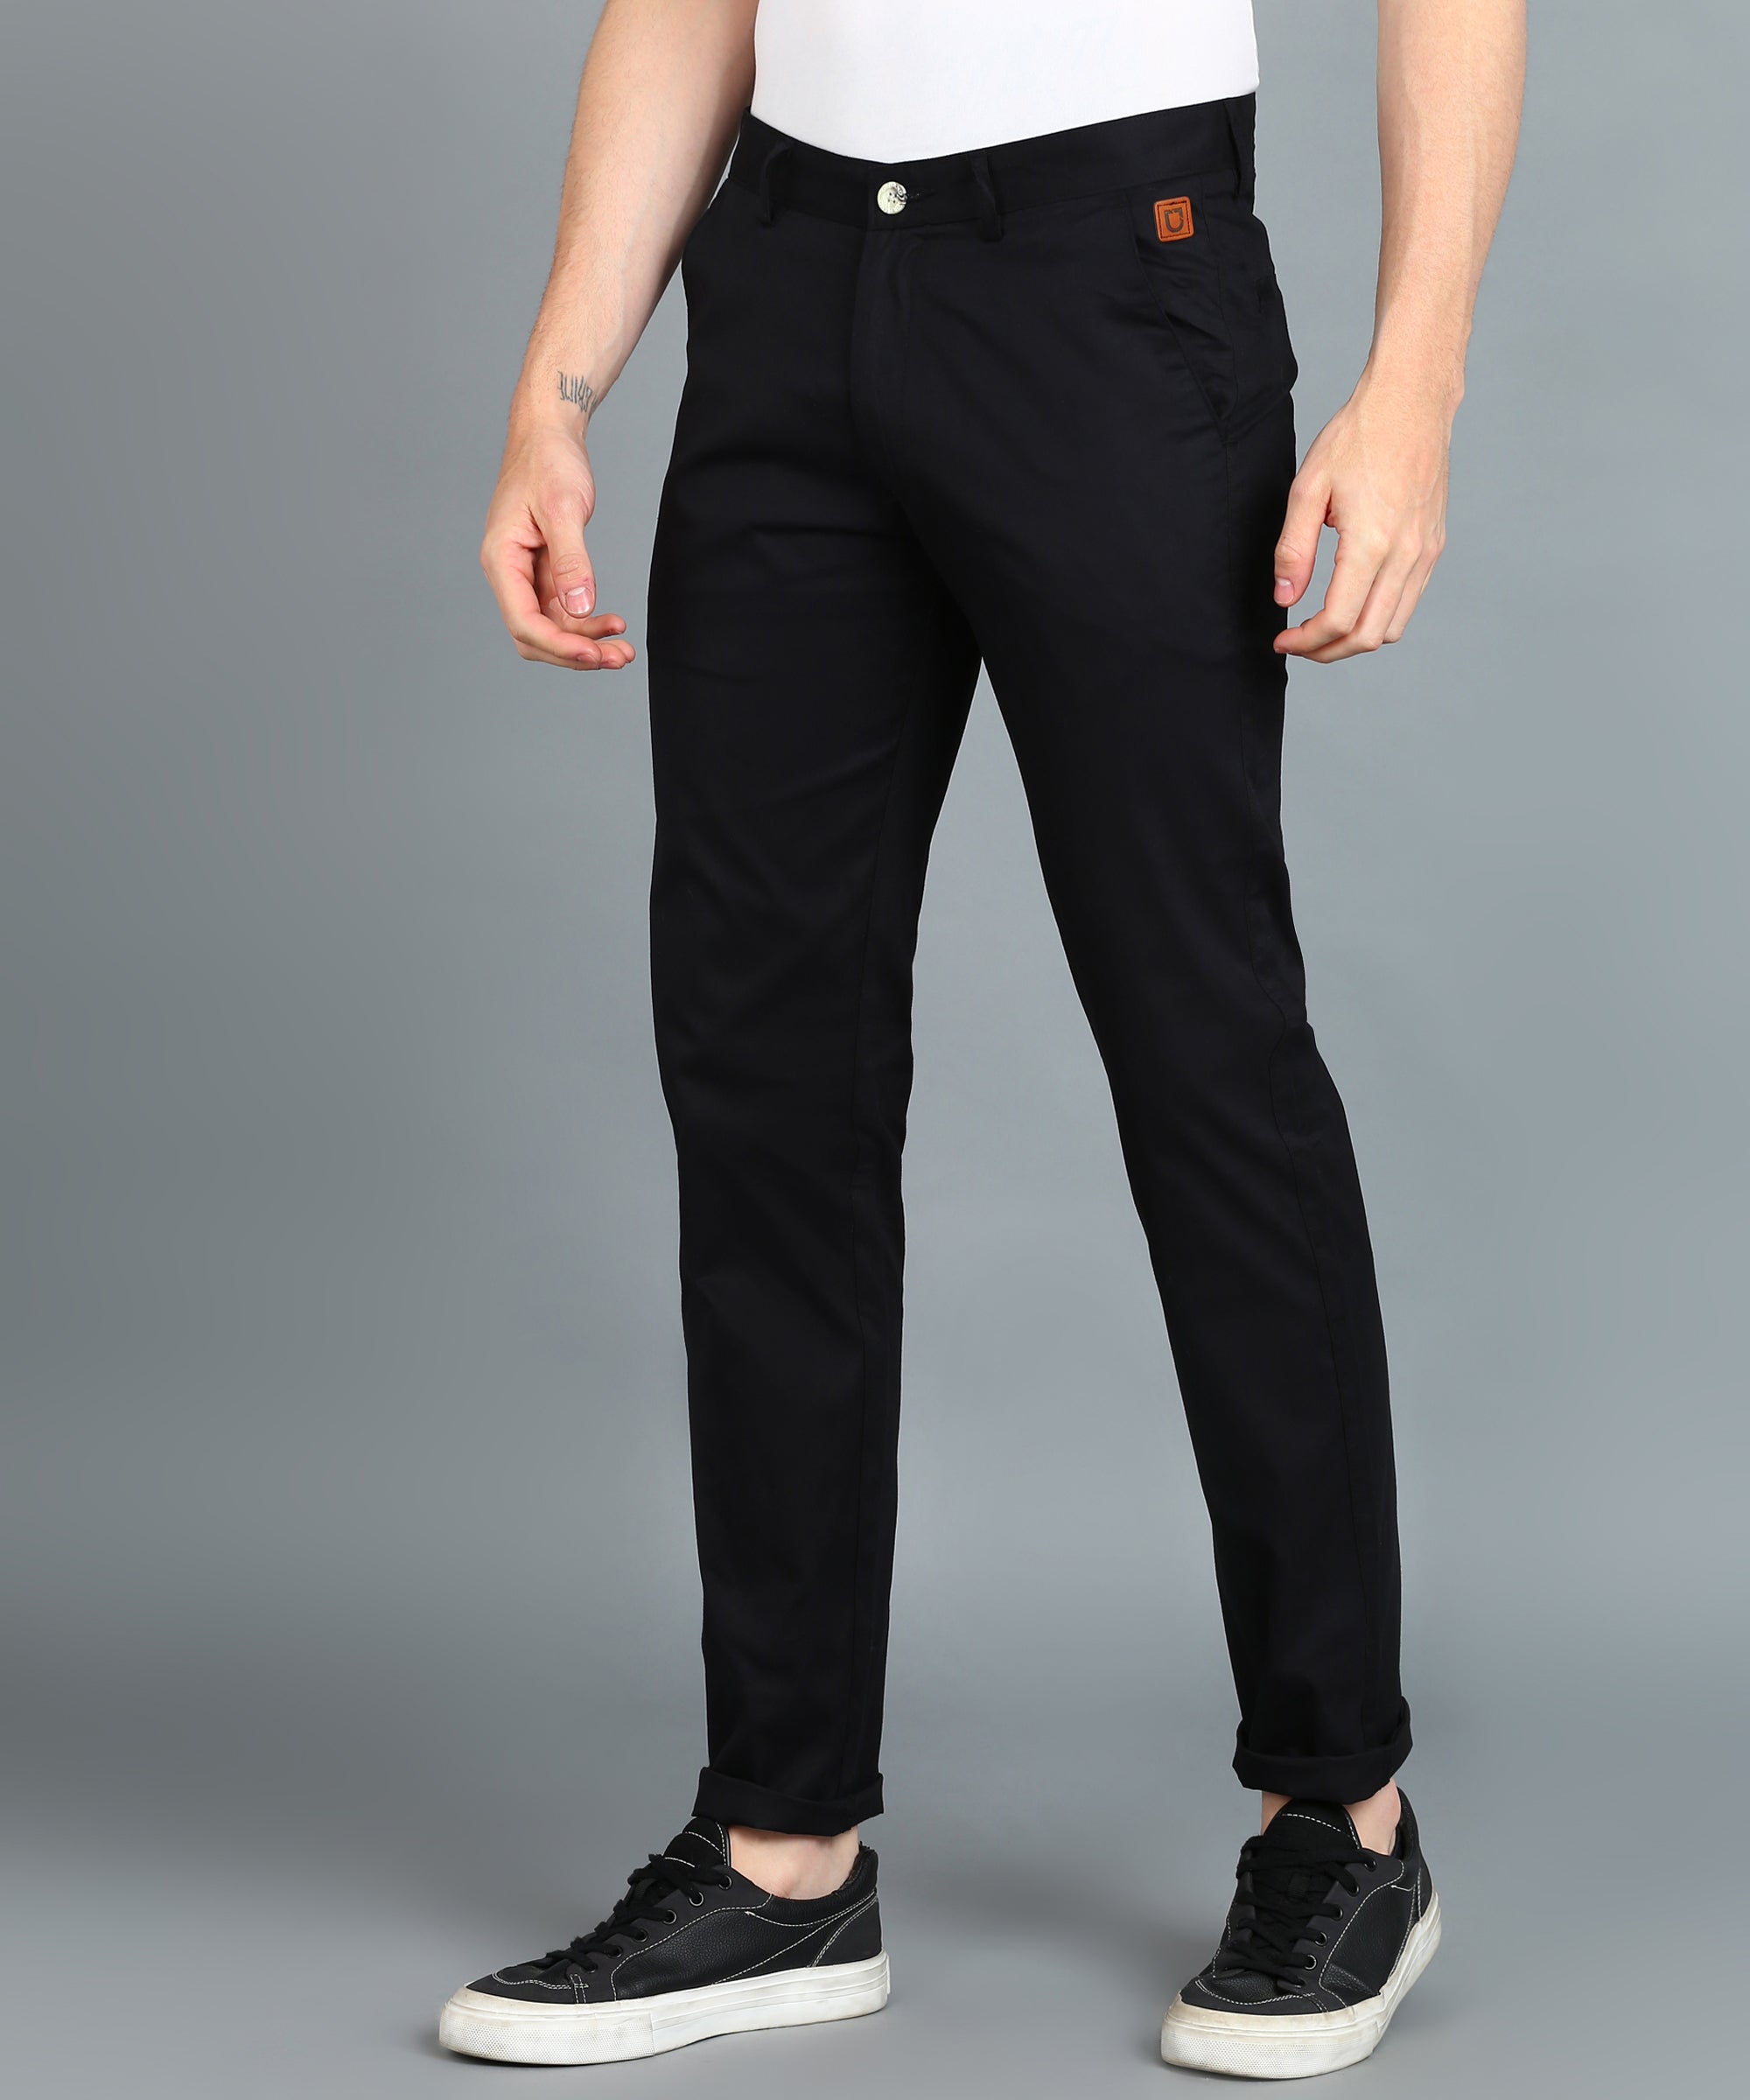 Urbano Fashion Men's Black Cotton Light Weight Non-Stretch Slim Fit Casual Trousers